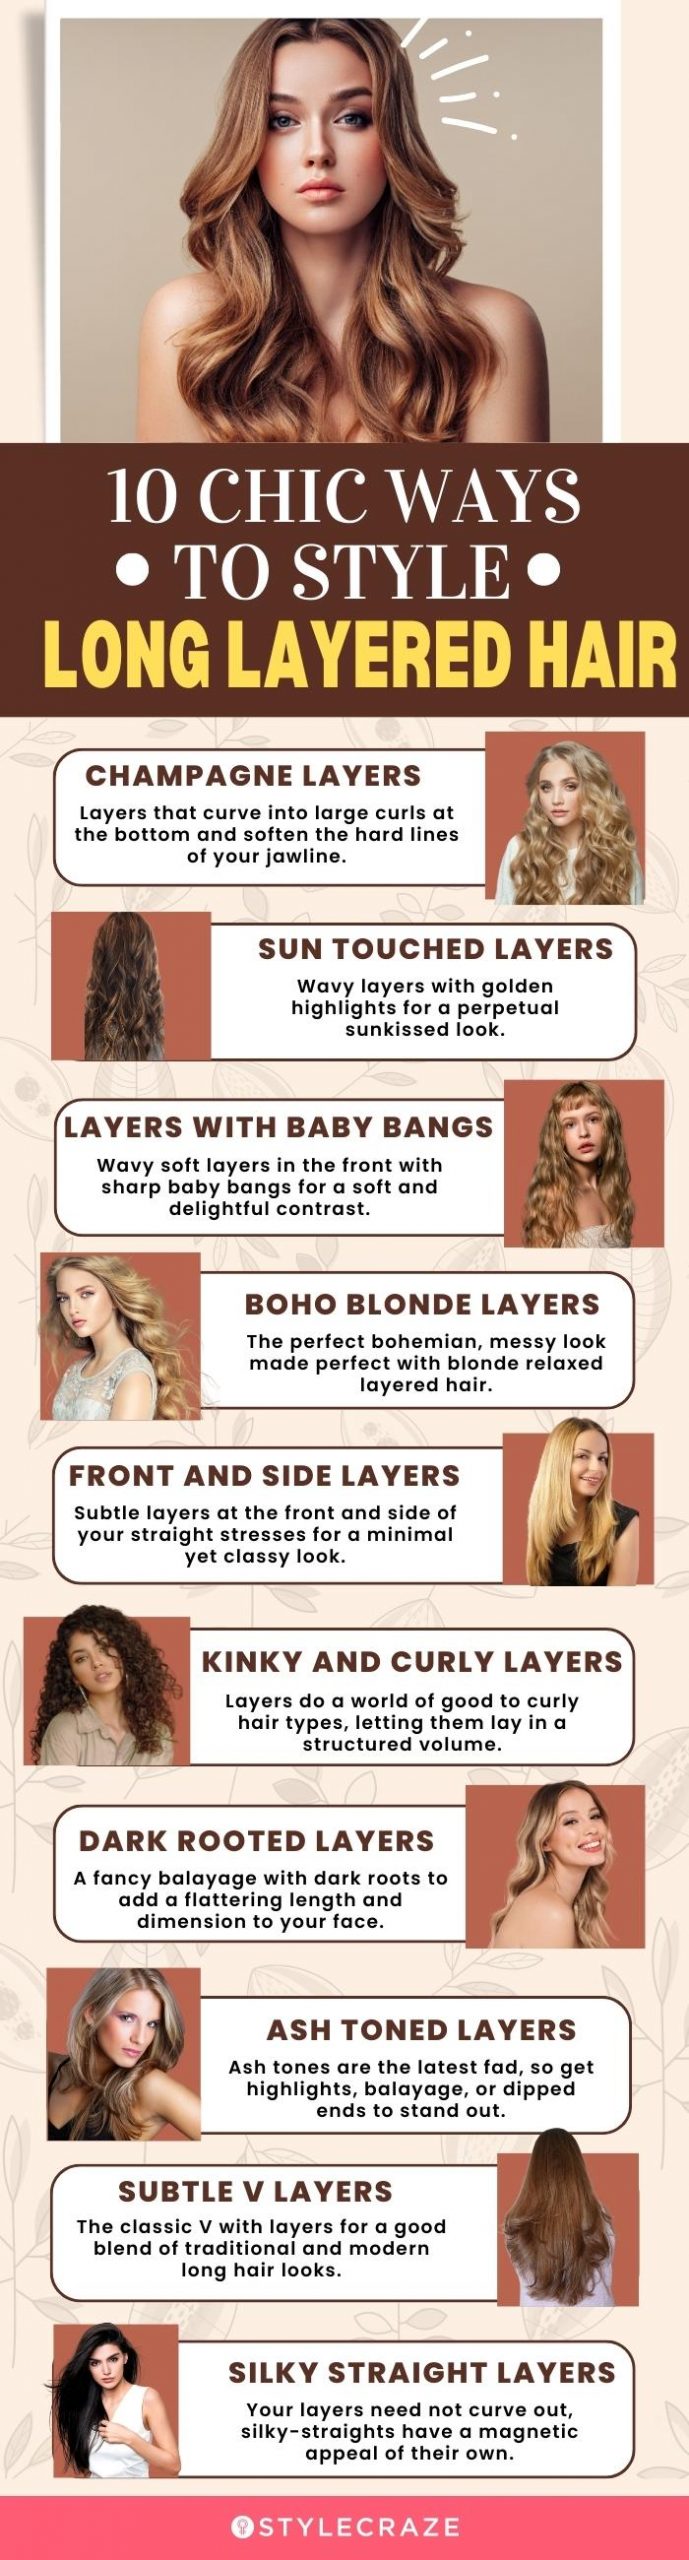 10 chic ways to style long layered hair (infographic)